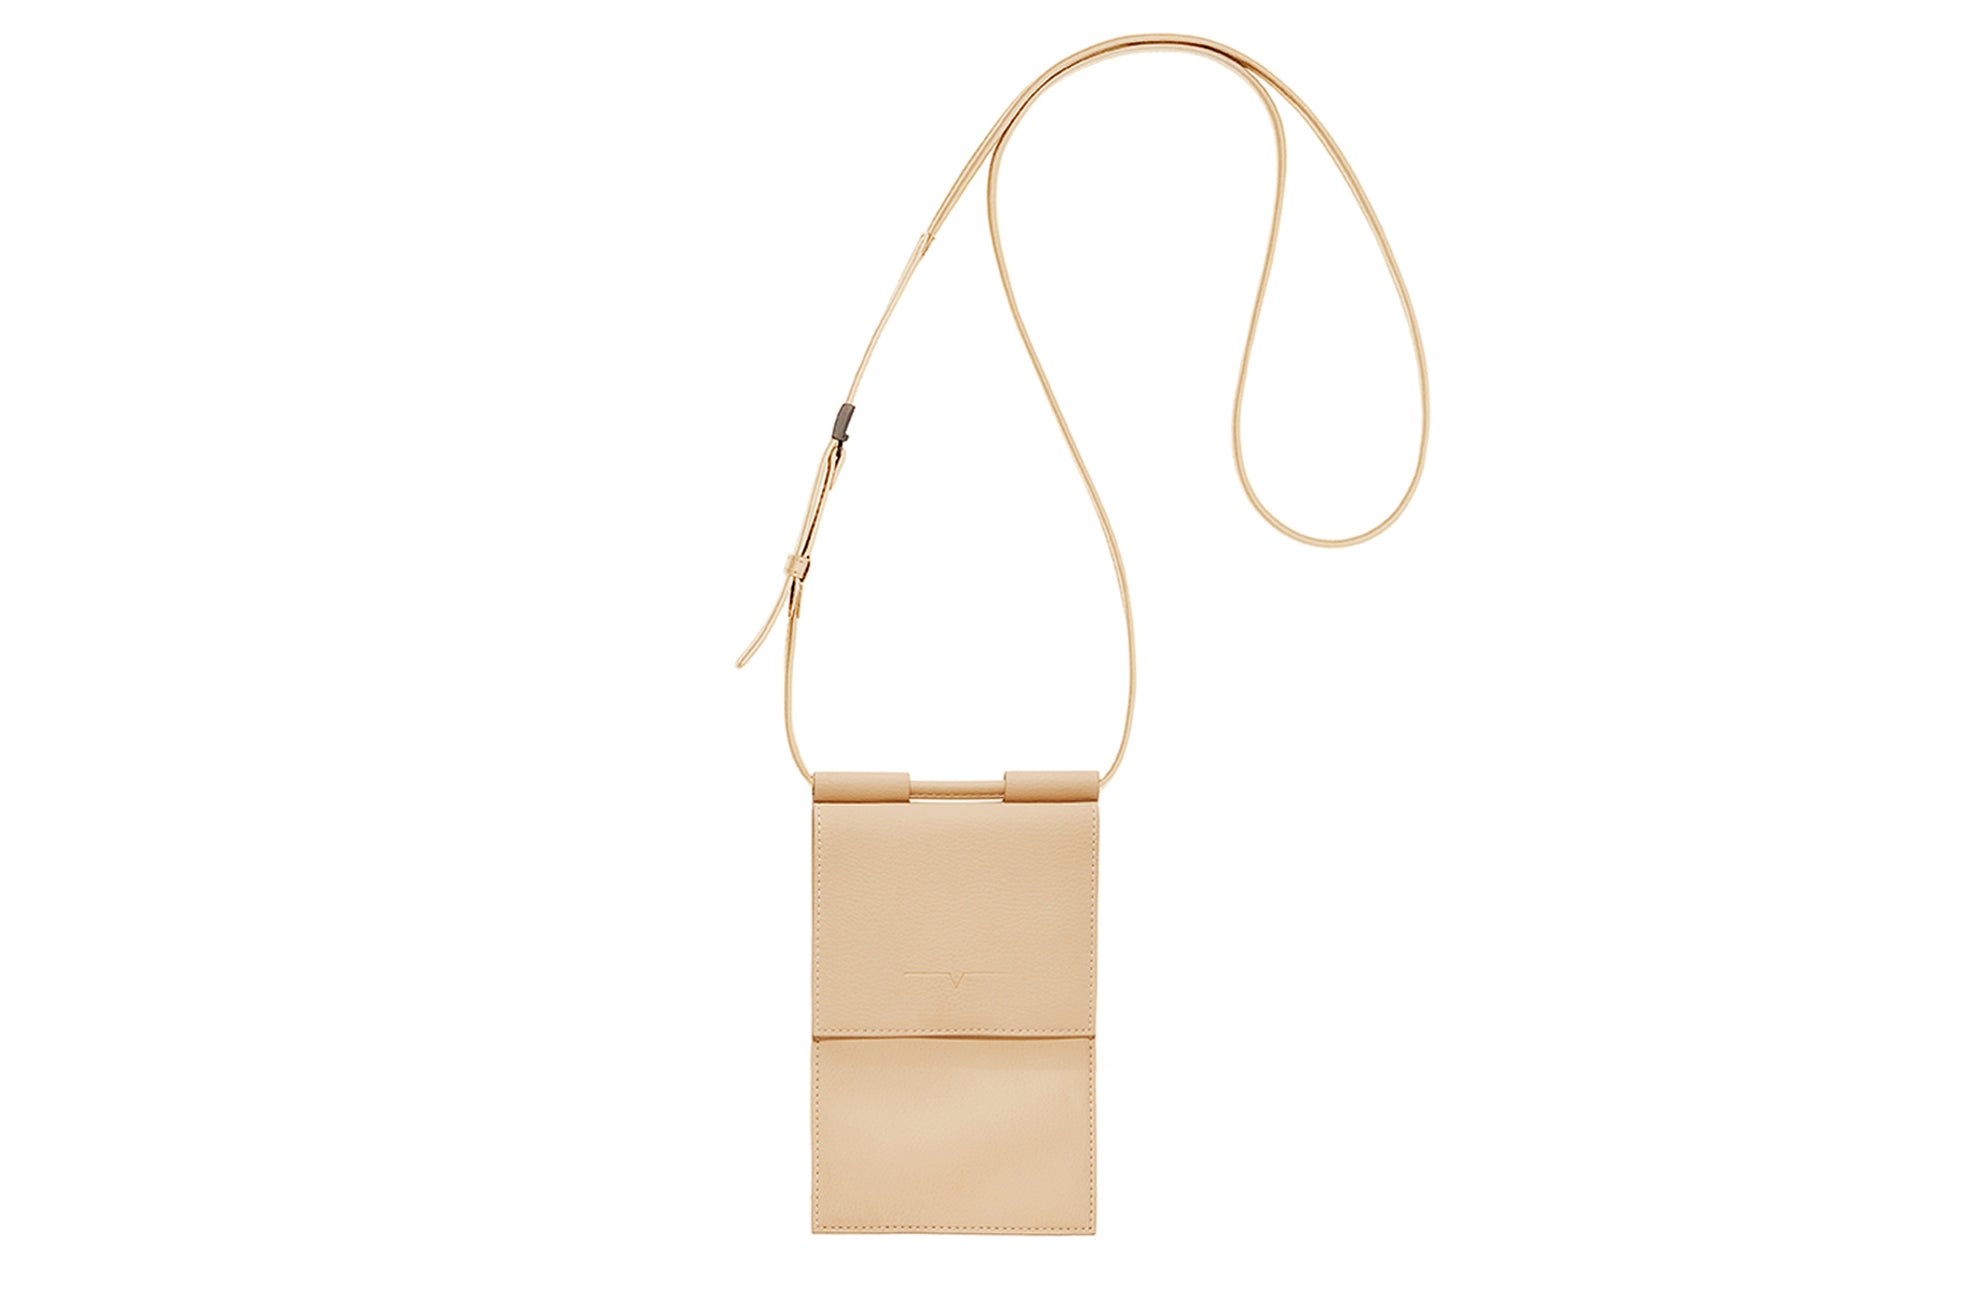 The Micro Bag in Technik-Leather in Sand image 1